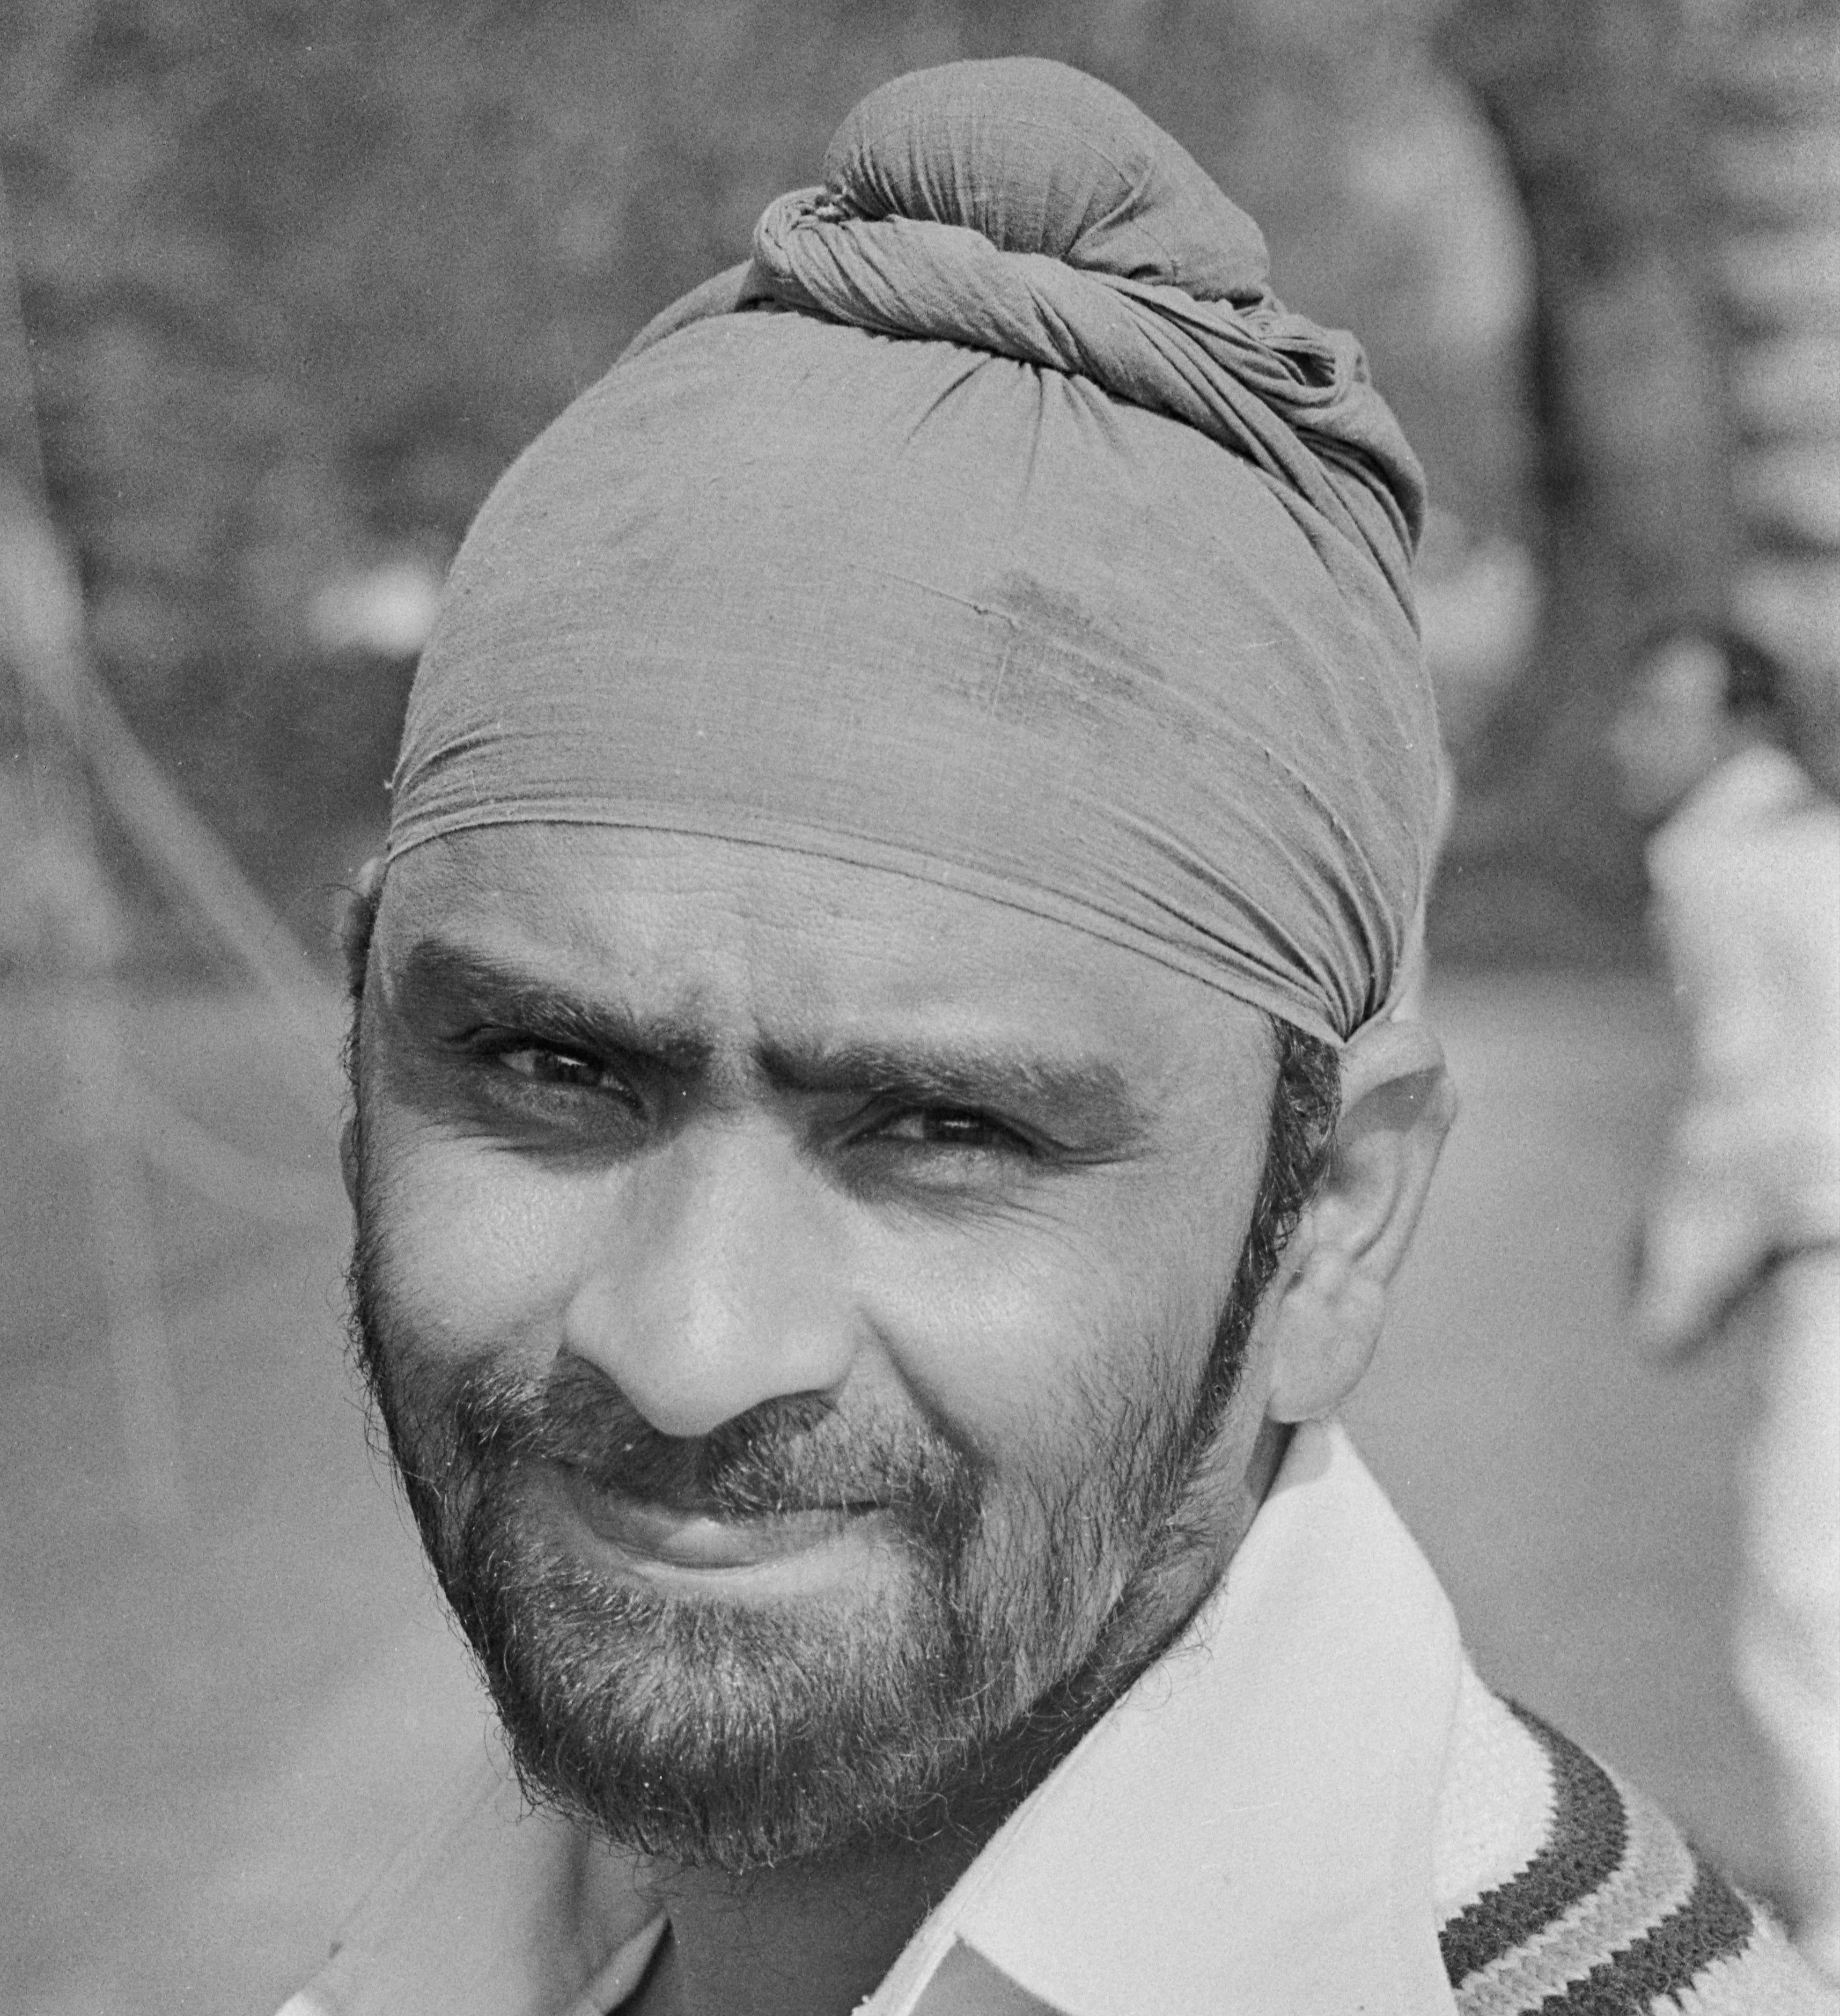 Indian cricketer Bishan Singh Bedi of the Indian cricket team during a tour of England on 29 April 1974